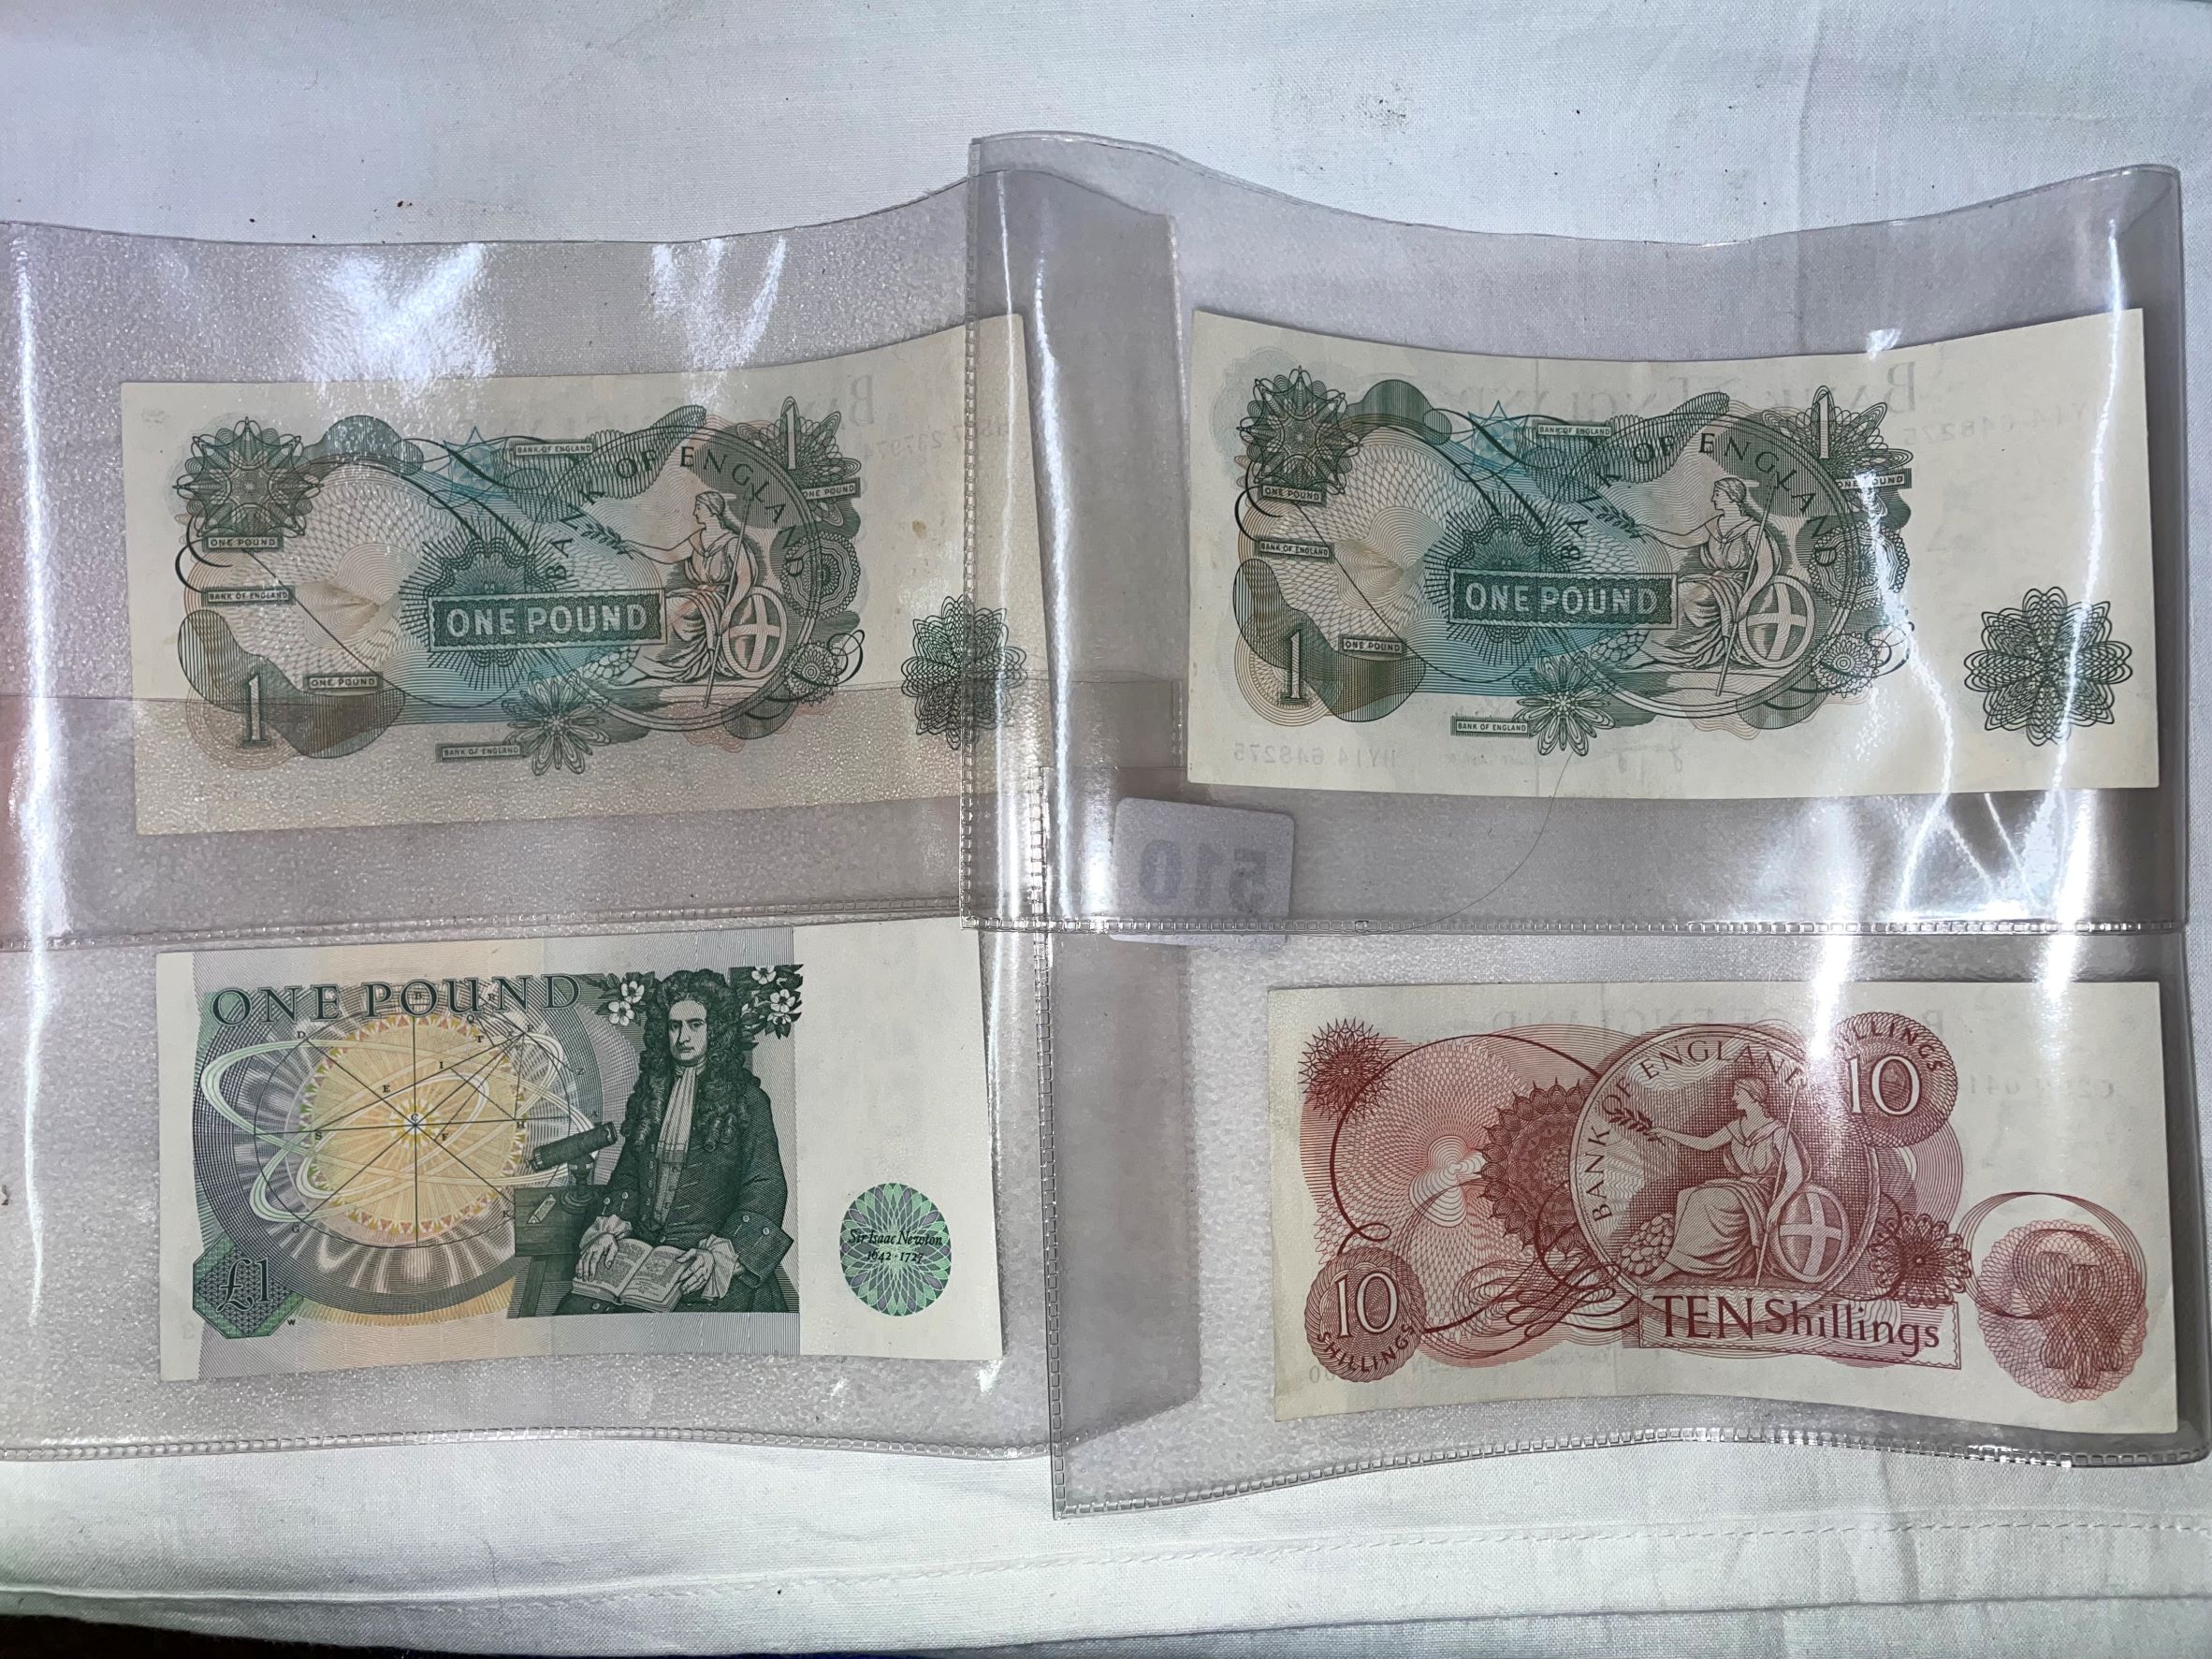 GB TEN SHILLING AND OLD ONE POUND NOTES - Image 2 of 2